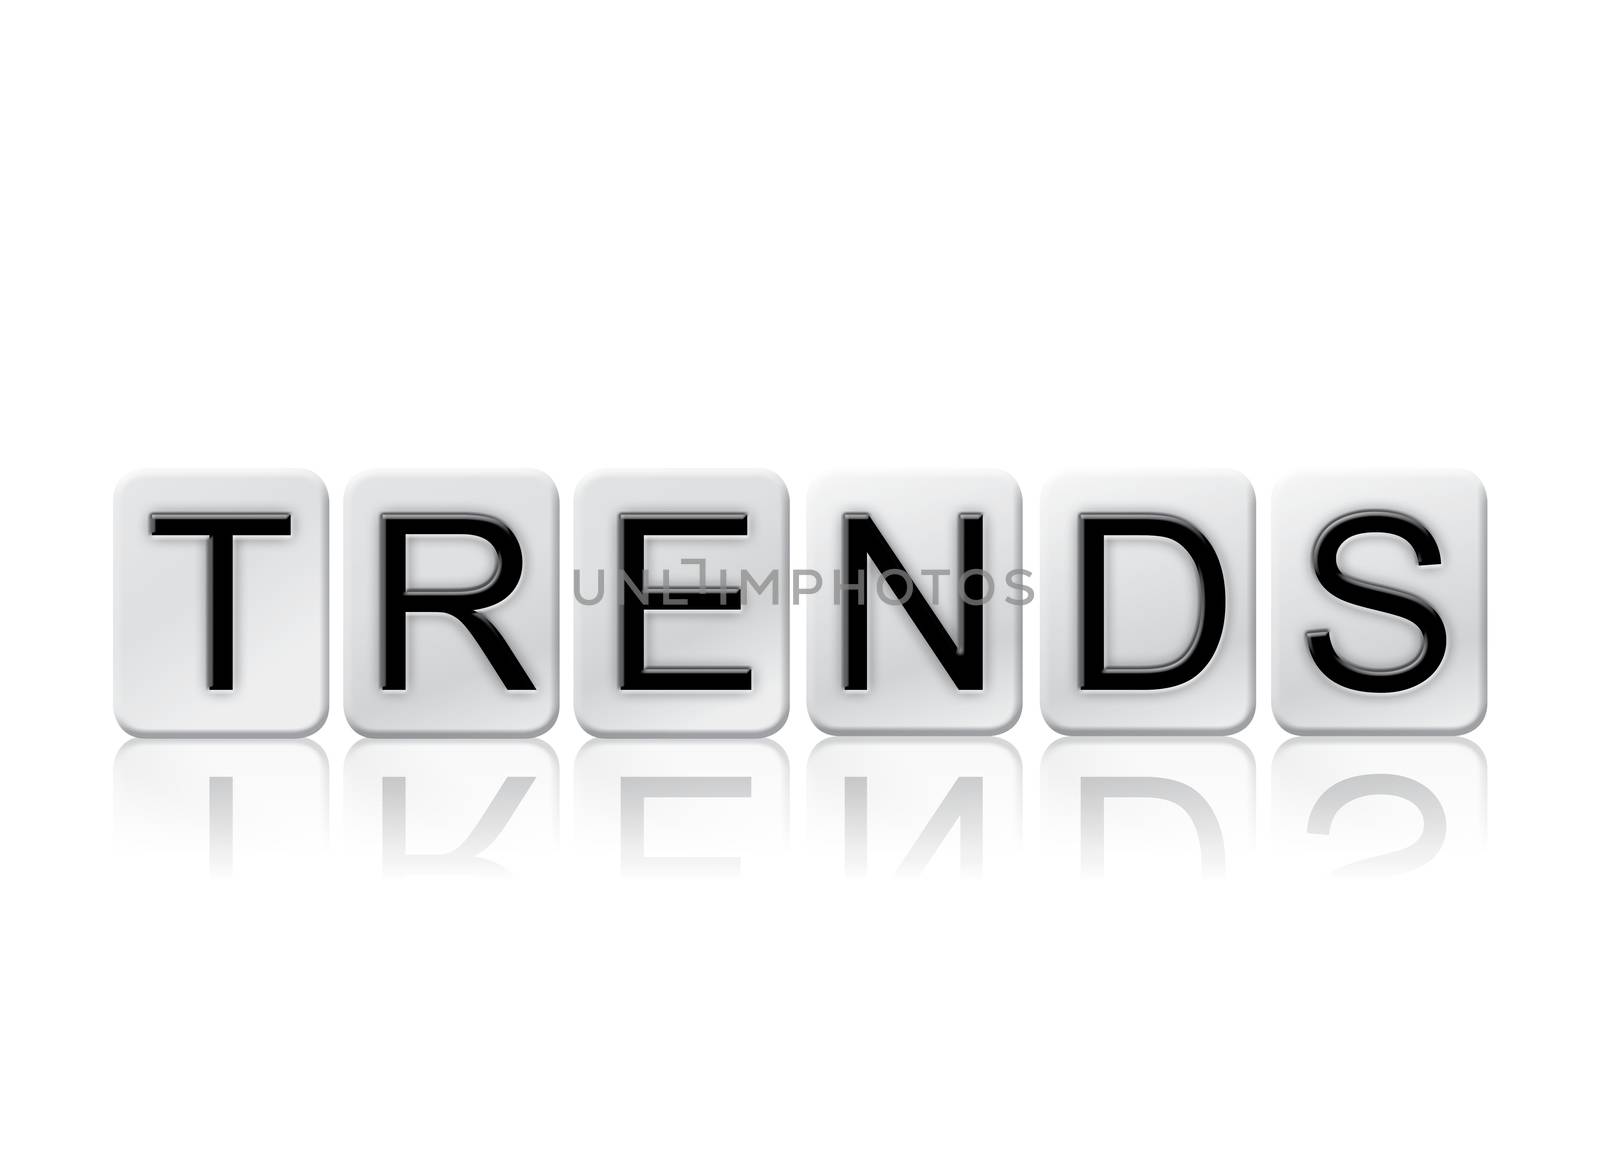 The word "Trends" written in tile letters isolated on a white background.